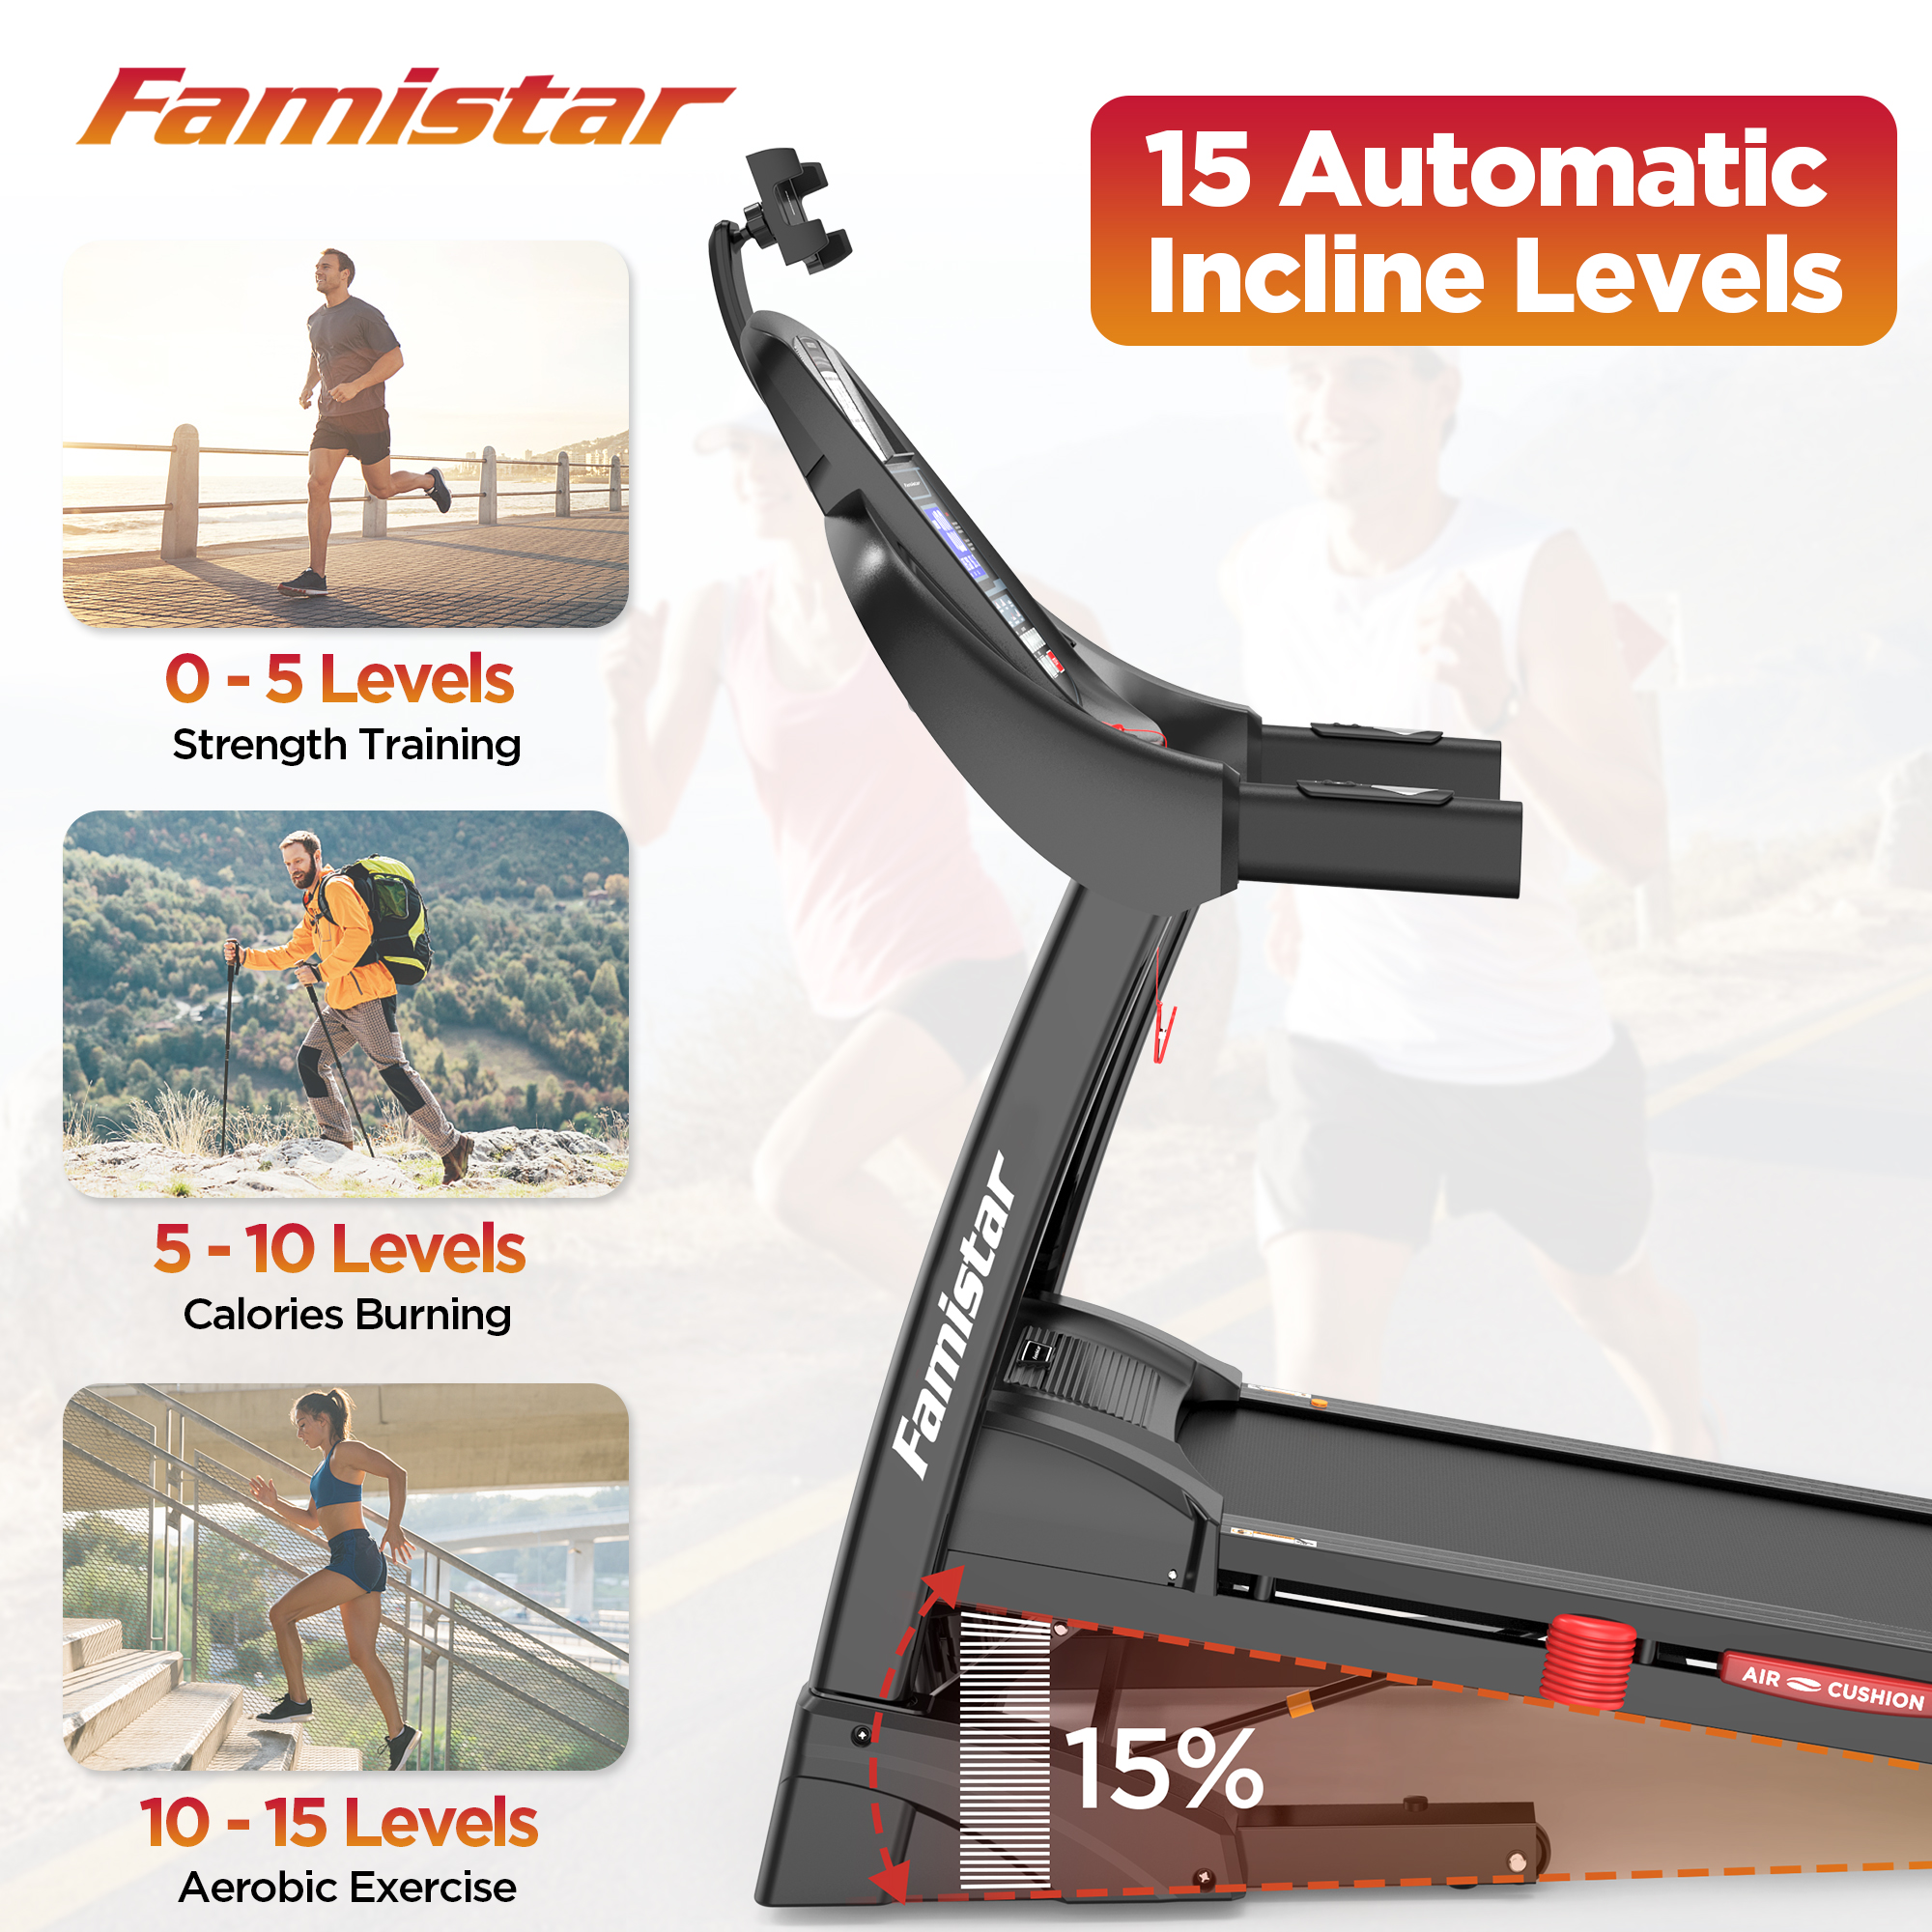 Famistar 4.5HP Folding Treadmill for Home with 15 Auto Incline, Smart APP, 300lbs, HiFi Bluetooth Speakers, 64 Programs, 10MPH Speed, Foldable EleTreadmill Running Machine, Knee Strap Gift - image 2 of 7